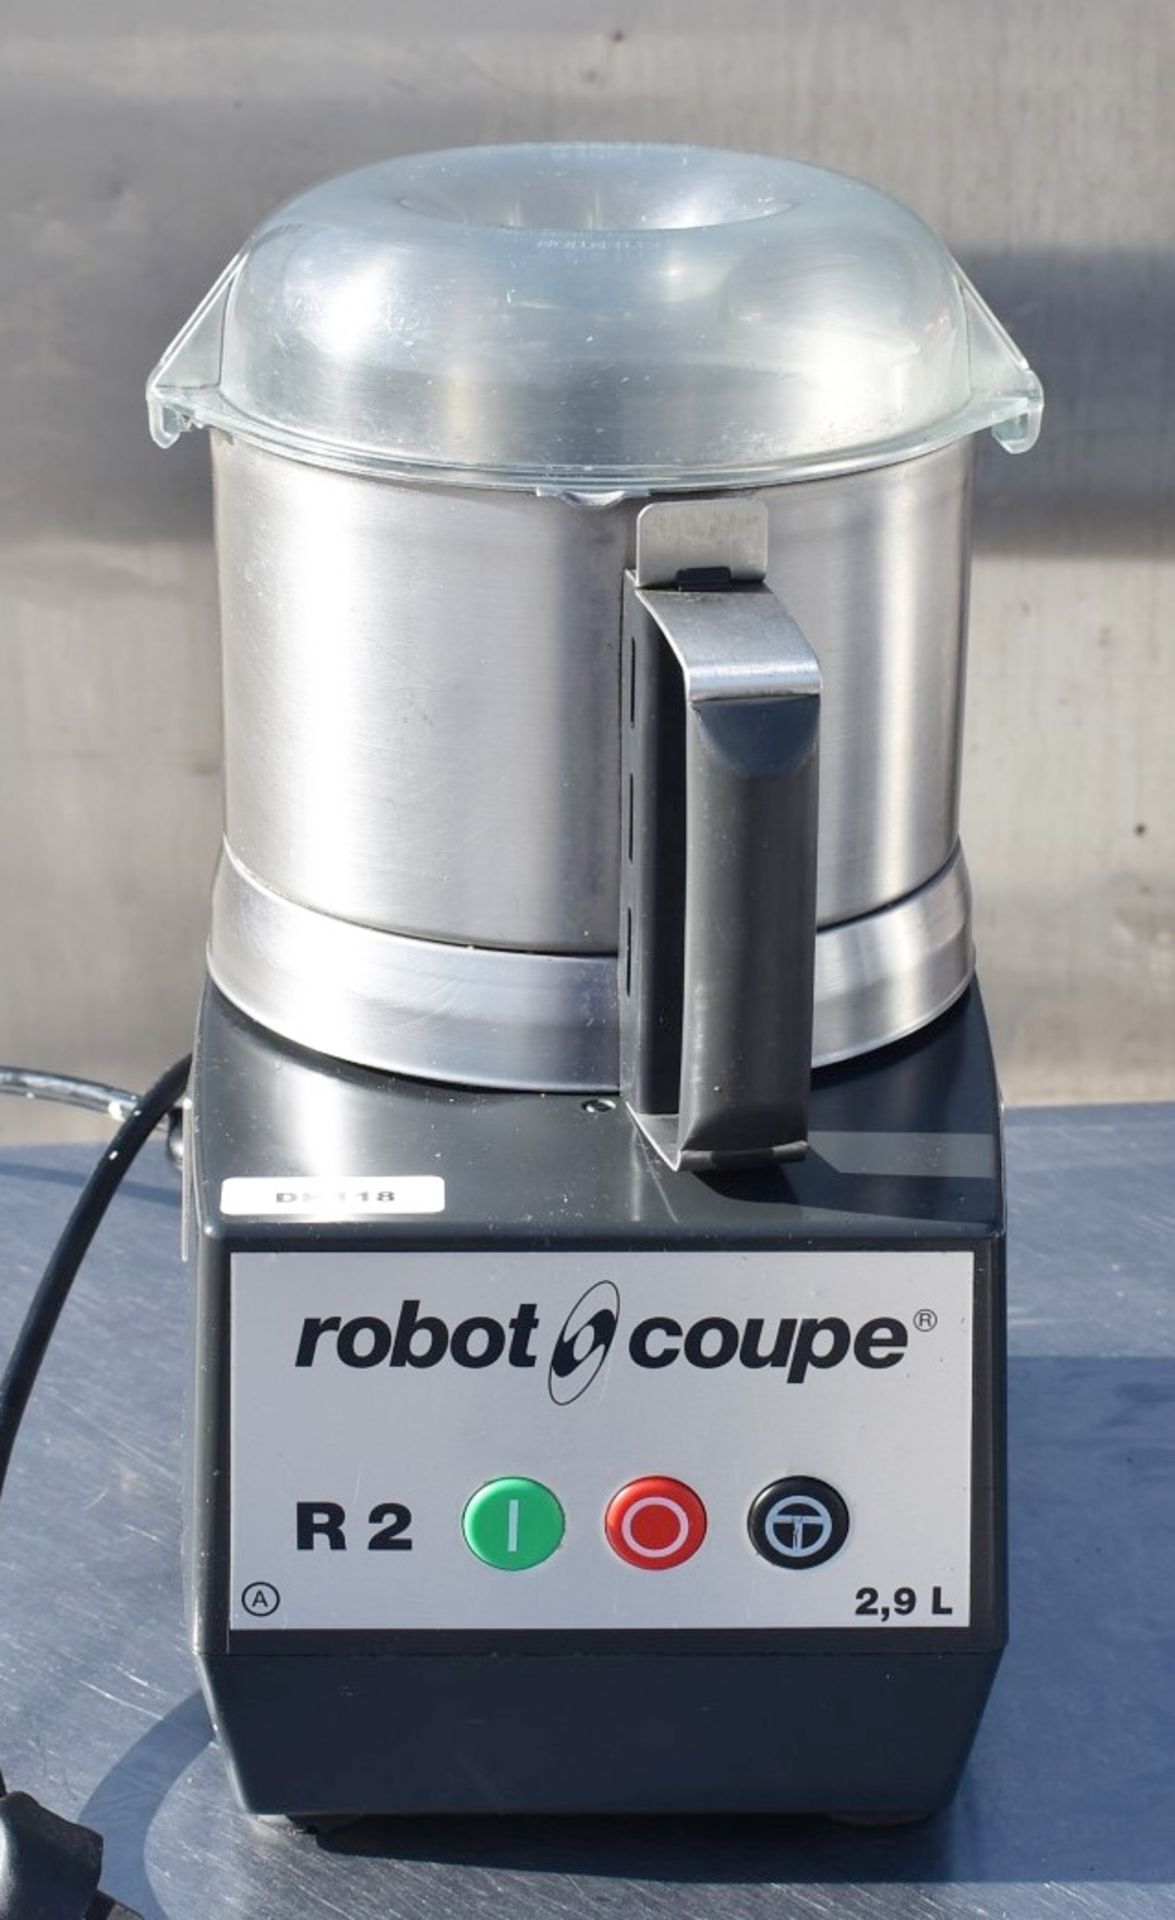 1 x Robot Coupe R2 Heavy Duty Cutter Blender - Recently Removed From a Dark Kitchen Environment - Image 6 of 9